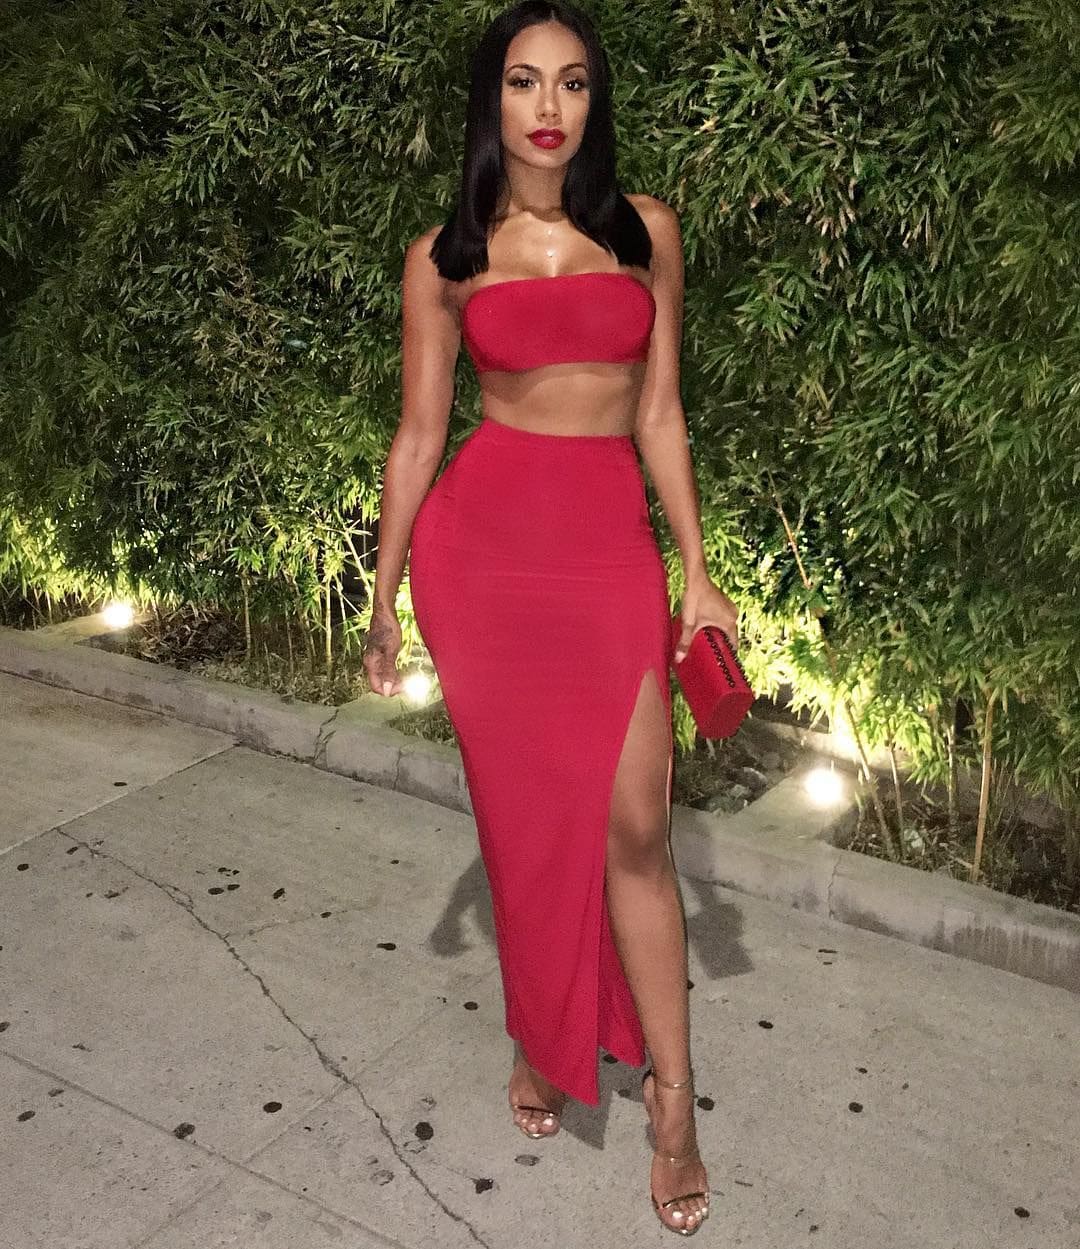 Erica Mena Continues To Shine In All Her Glory In These NSFW Birthday Pics